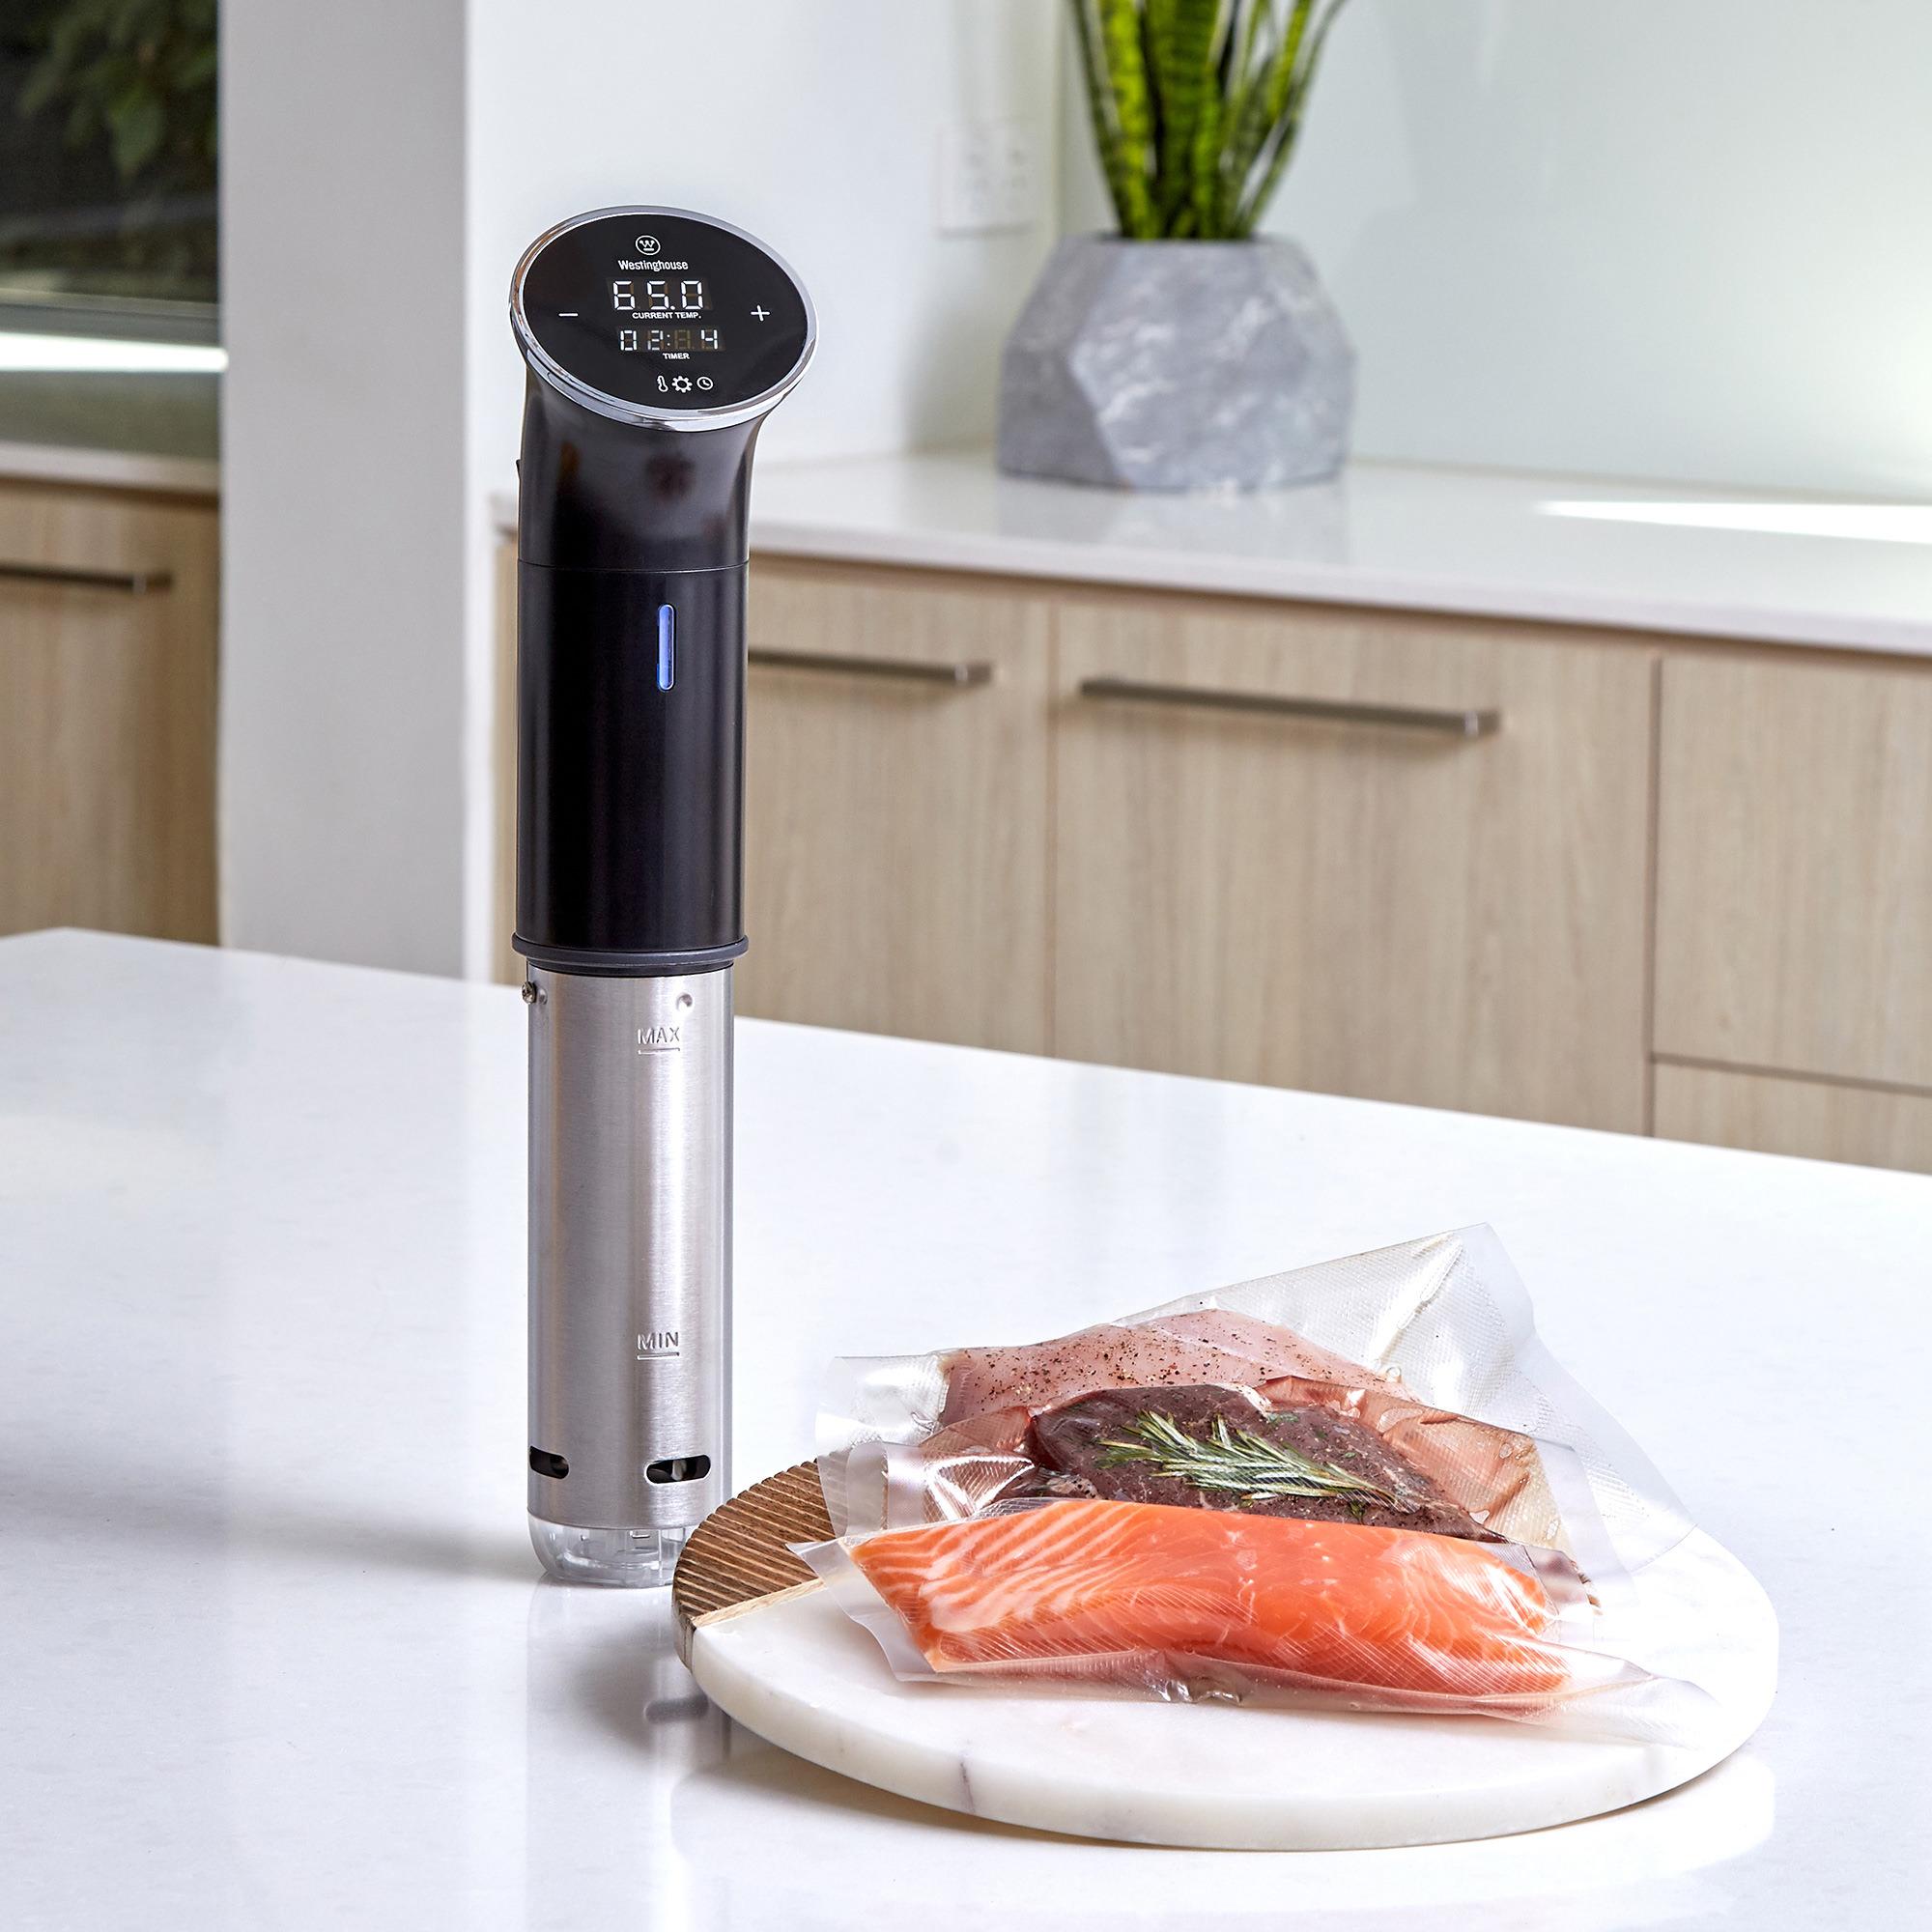 Westinghouse Sous Vide Immersion Cooker Image 6